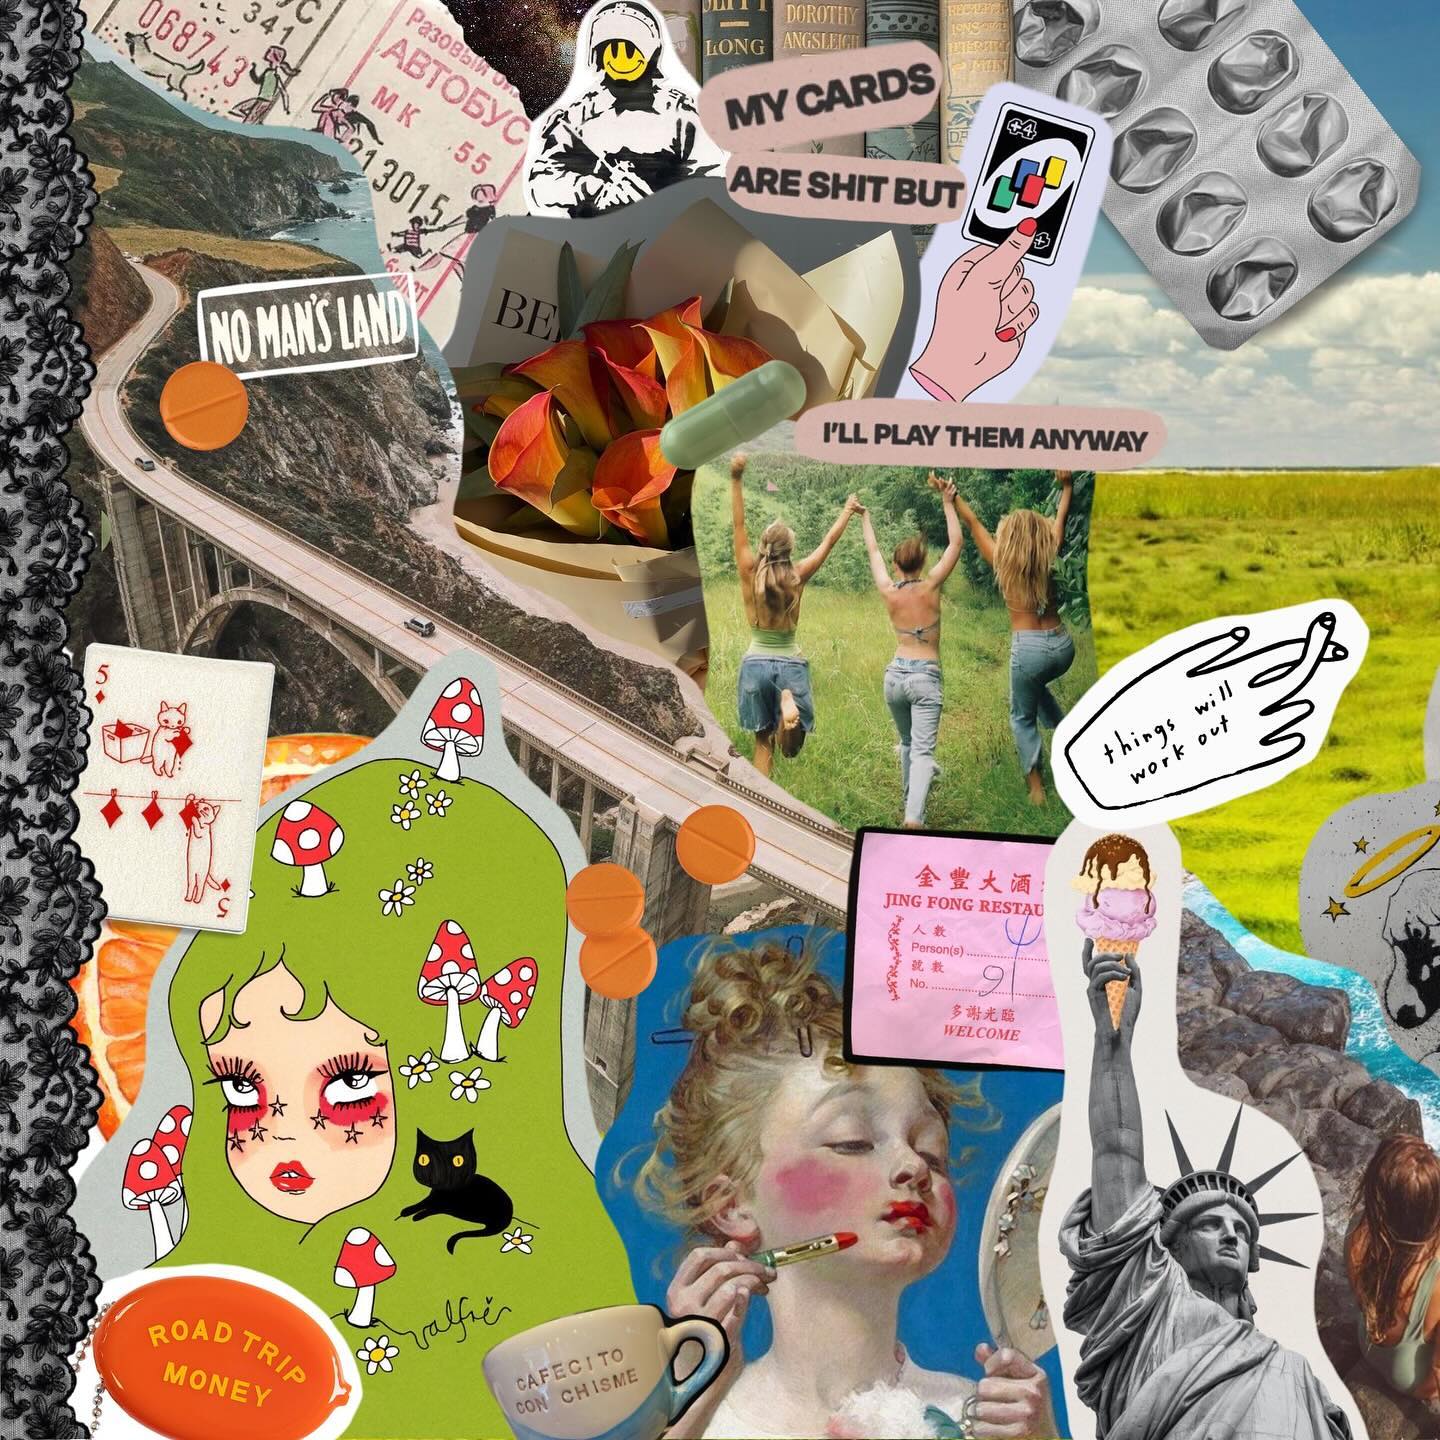 Did someone say summer mood boards?🦩
These are giving me major I-Spy vibes. 🔎 
#MoodBoard 
#moodboards #summermood #summermoodboard #junkjournaling #fyp #digitaljournal #collage #piccollage #collageart #digitalcollage #digitalart #procreate #summertime #manifesting #visionboard #visionboards #digitalvisionboard #summervibes #feelgood #insidemymind #ispy